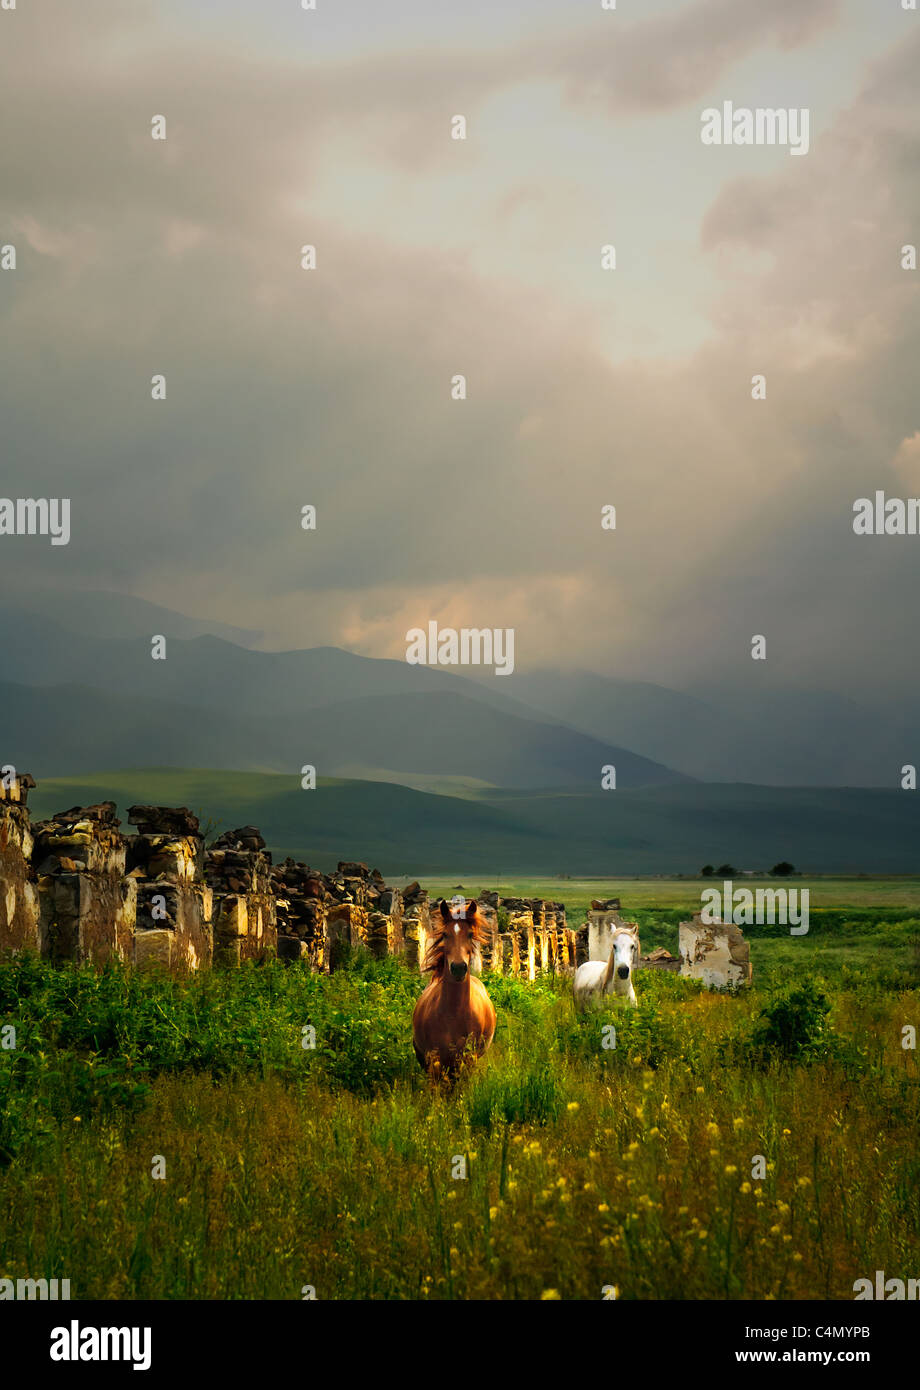 A pair of wild horses running through a field Stock Photo